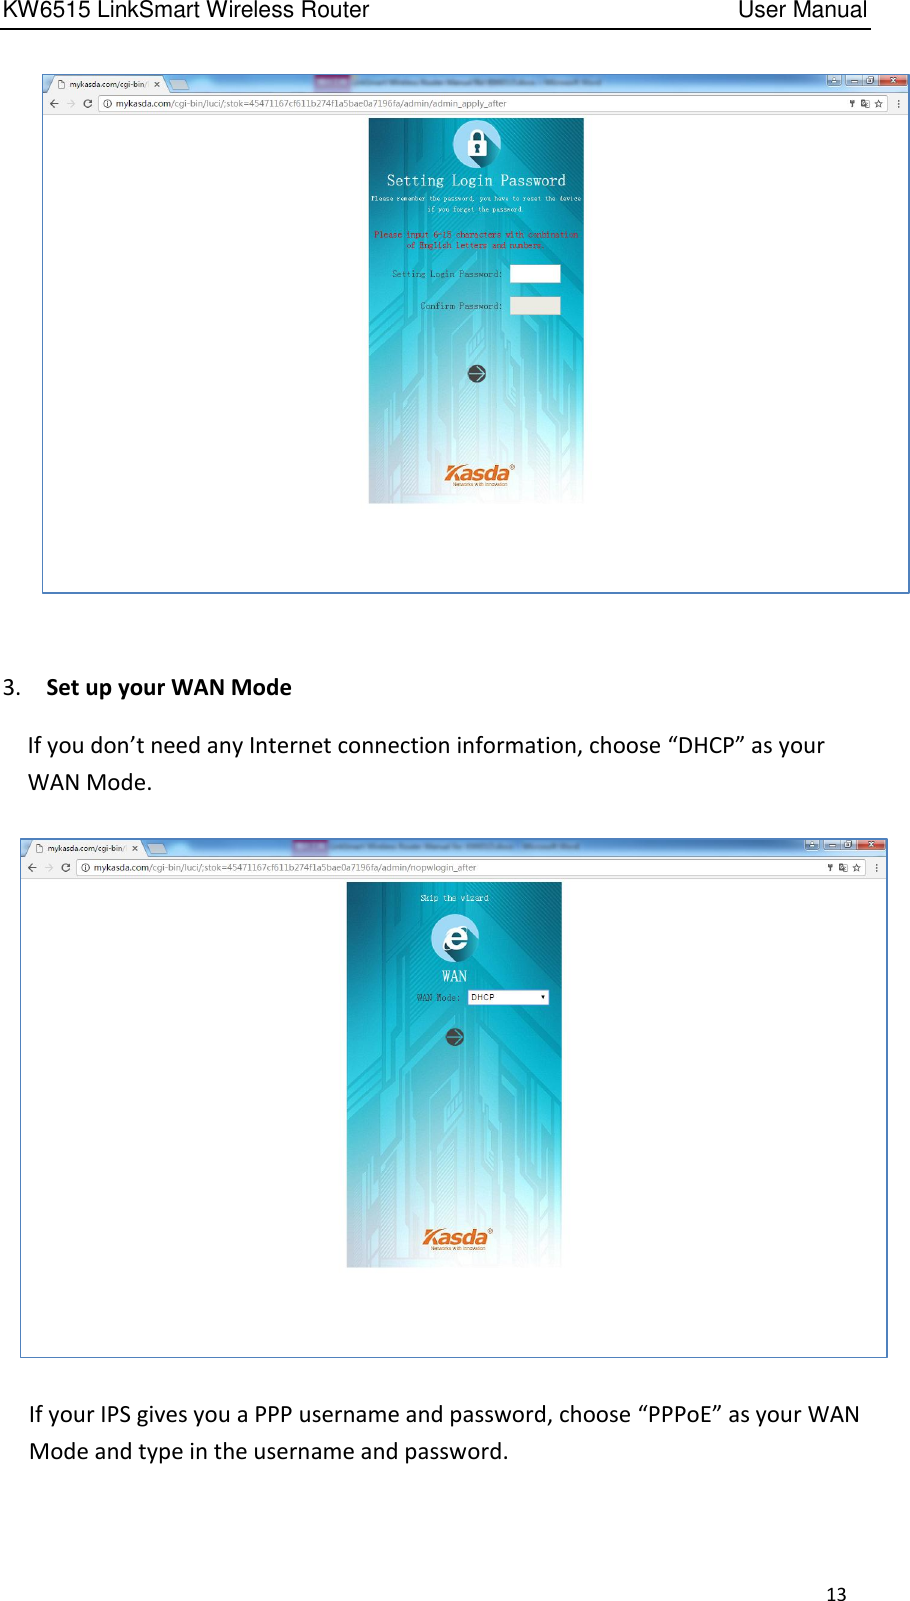 KW6515 LinkSmart Wireless Router         User Manual 13   3.    Set up your WAN Mode   If you don’t need any Internet connection information, choose “DHCP” as your WAN Mode.  If your IPS gives you a PPP username and password, choose “PPPoE” as your WAN Mode and type in the username and password. 